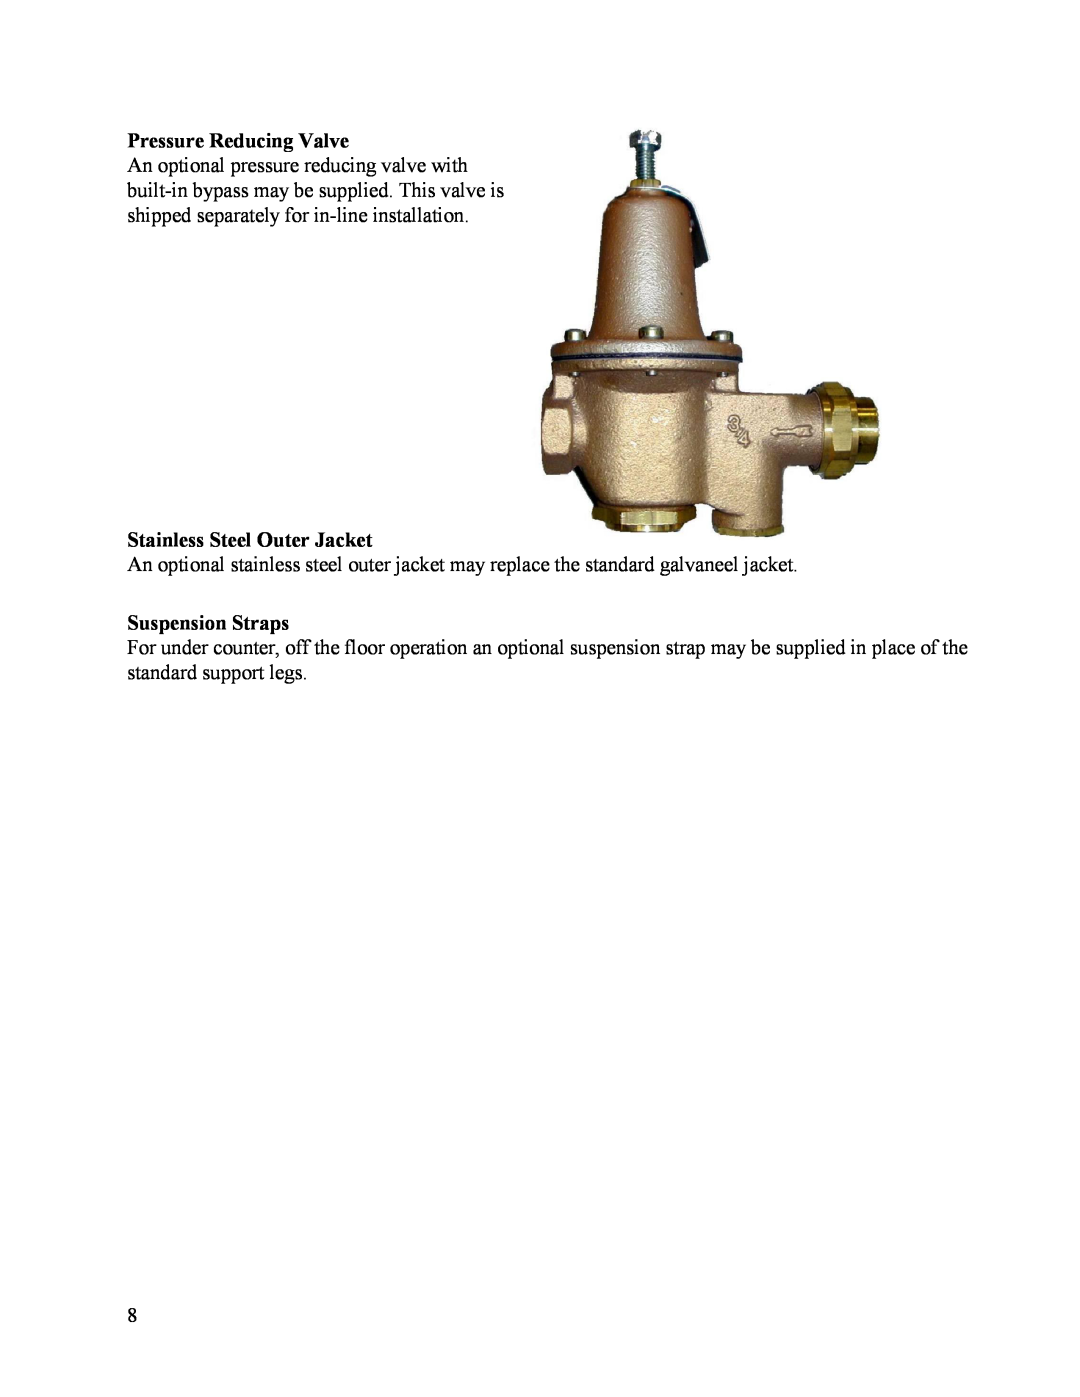 Hubbell Electric Heater Company B manual Pressure Reducing Valve, Stainless Steel Outer Jacket, Suspension Straps 